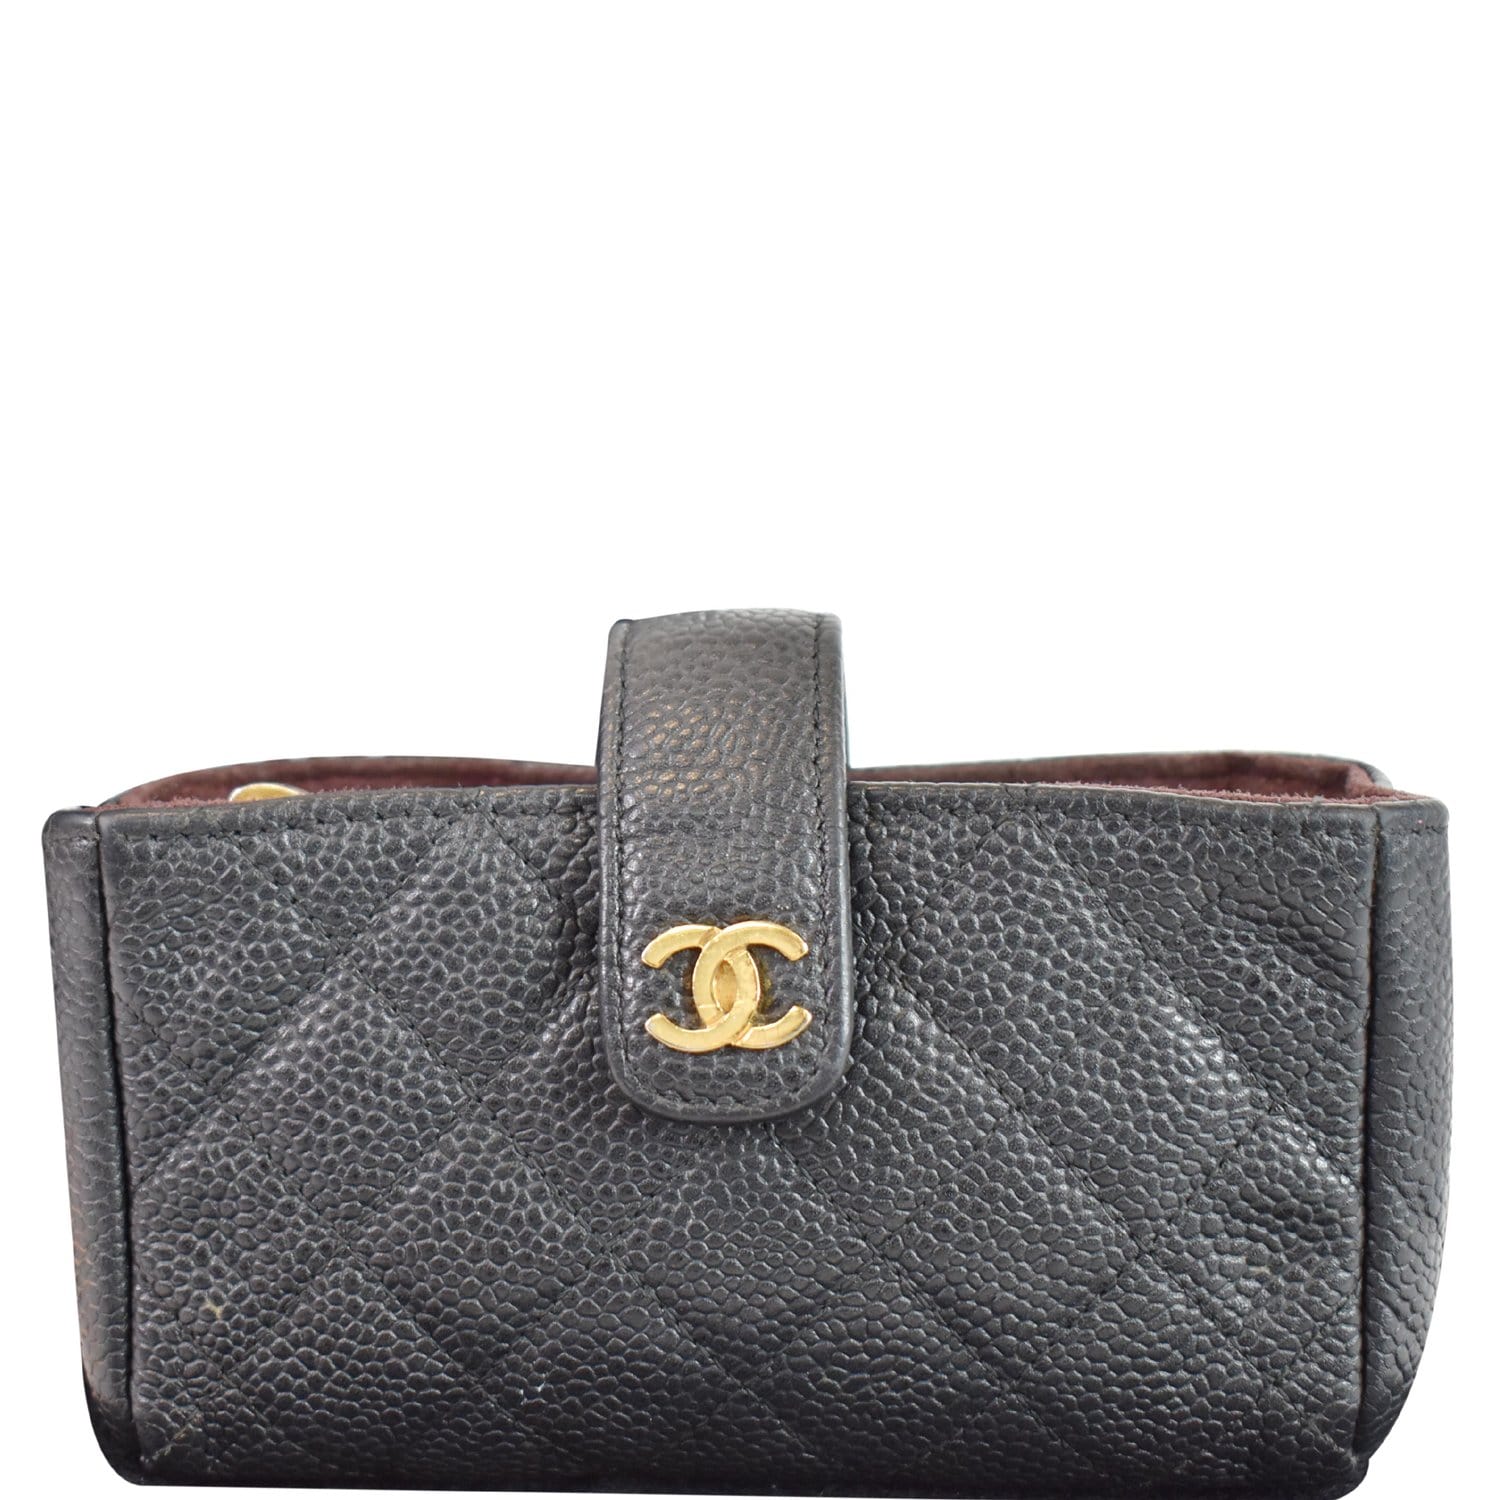 Chanel Quilted Caviar Leather Mini Phone Holder Clutch